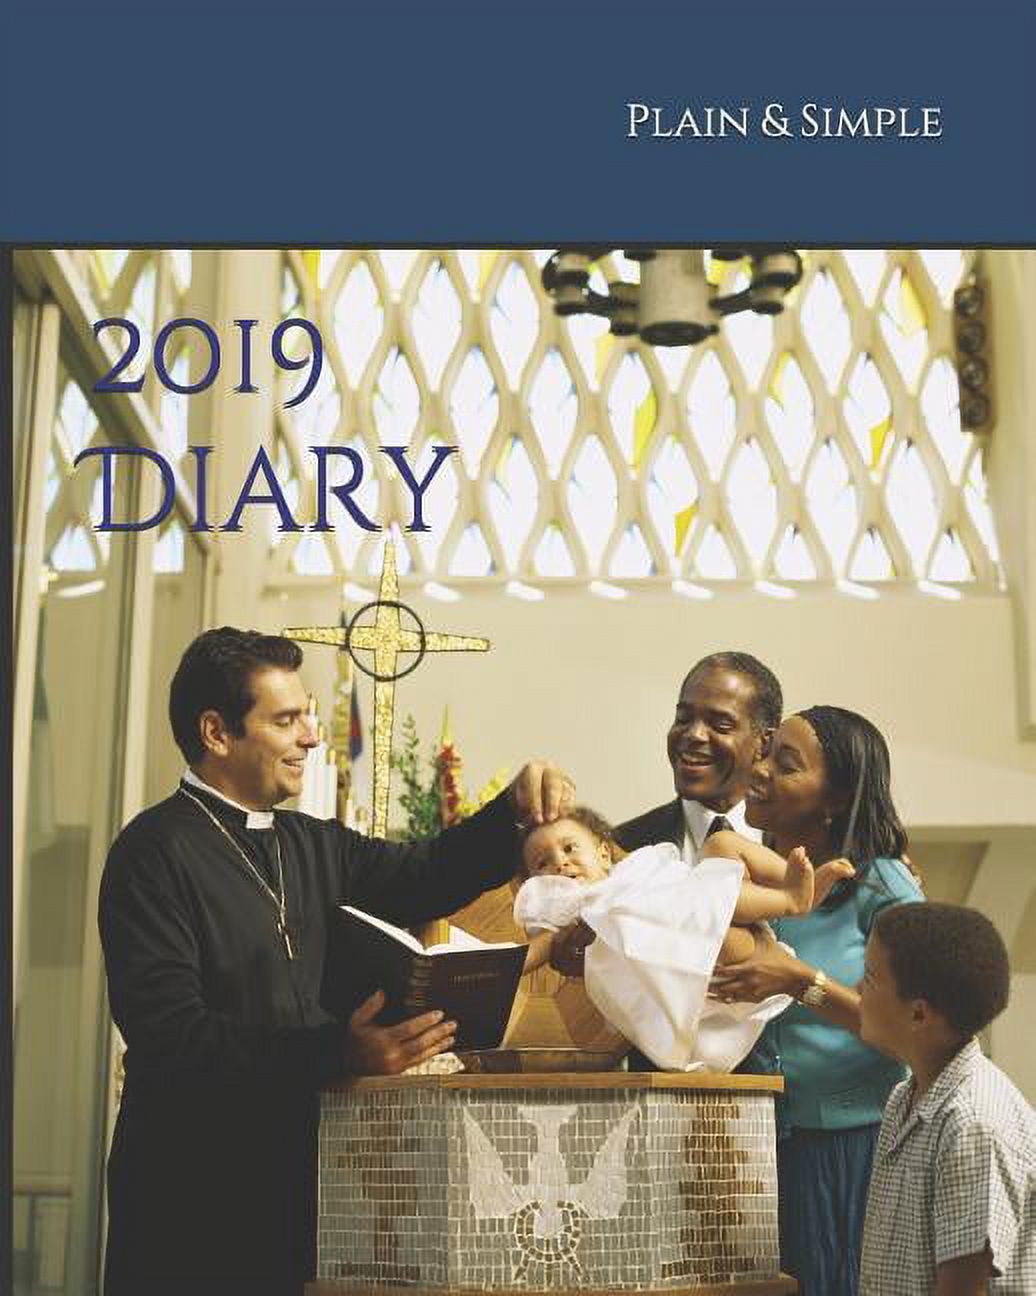 Diary - Plain & Simple Faith: 2019 Diary : Weekly Desk Diary with Scriptures & Verses to Inspire You Throughout the Year - Christian Diary, Christians Diary, Faith Diary, Church Diary (Series #1) (Paperback) - image 1 of 1